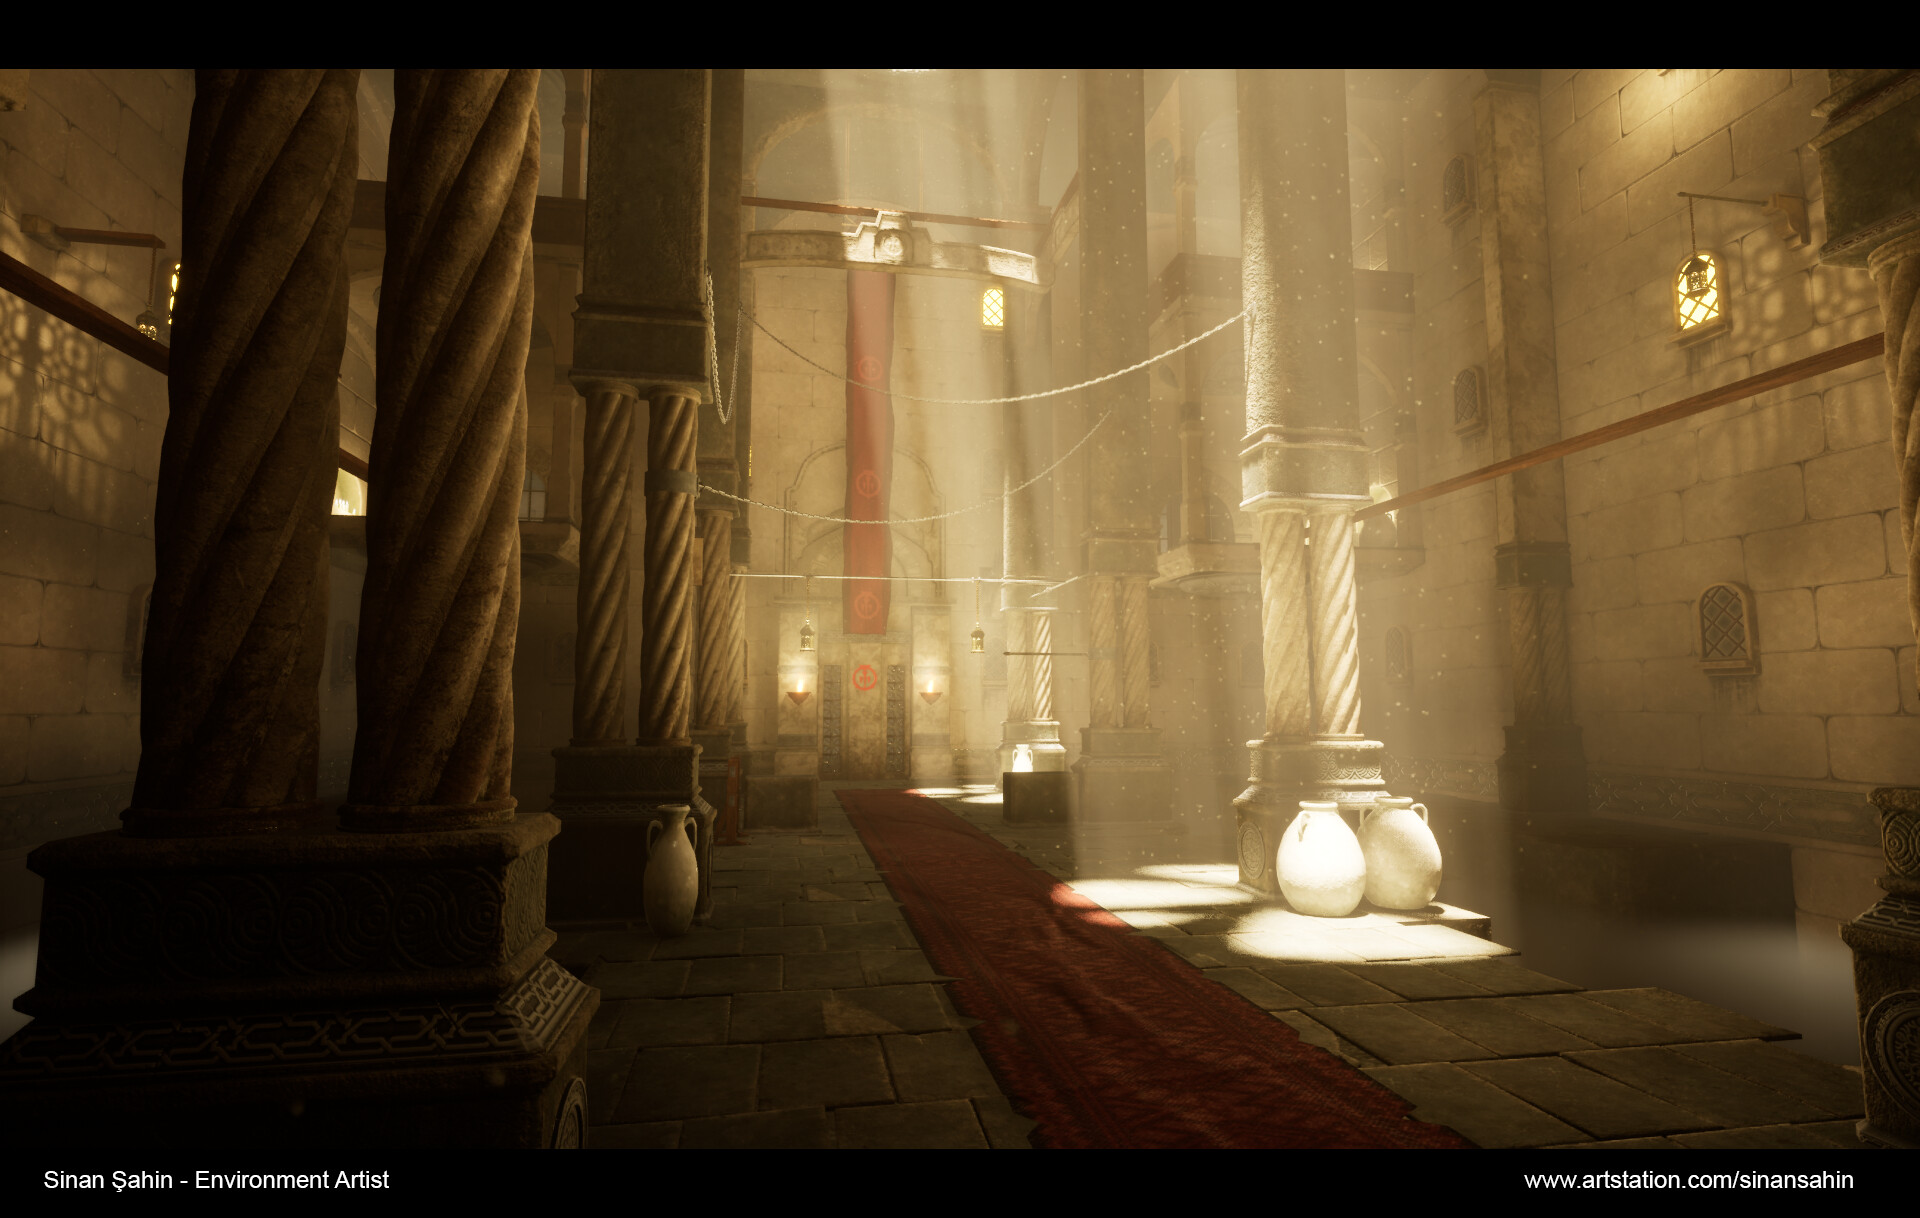 Here is what Prince of Persia: Warrior Within Remake could look like in  Unreal Engine 4